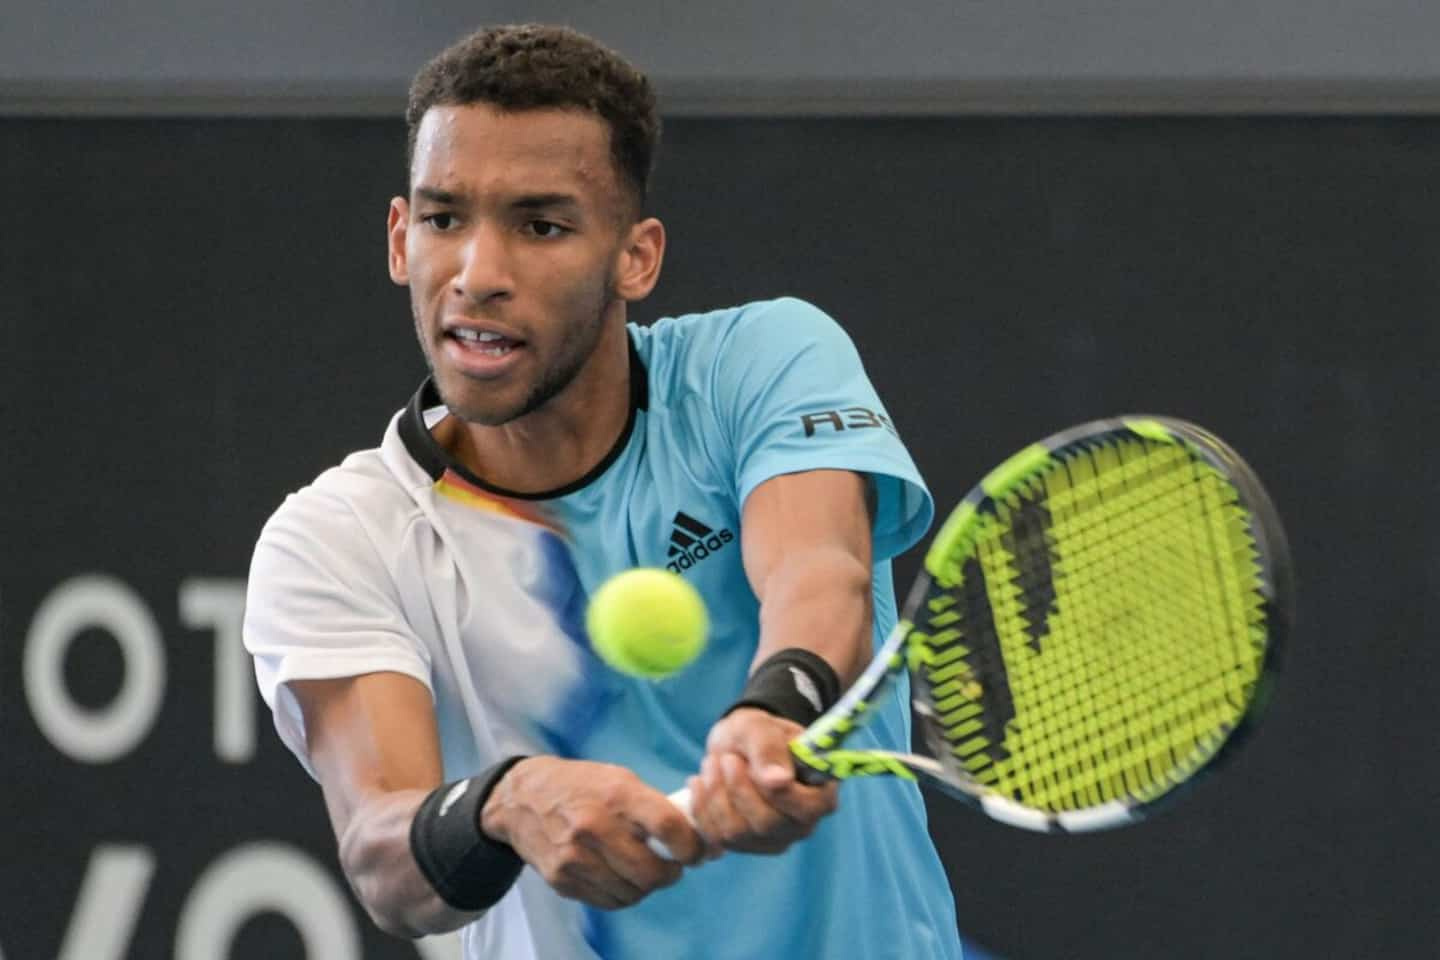 A year that started badly for Félix Auger-Aliassime